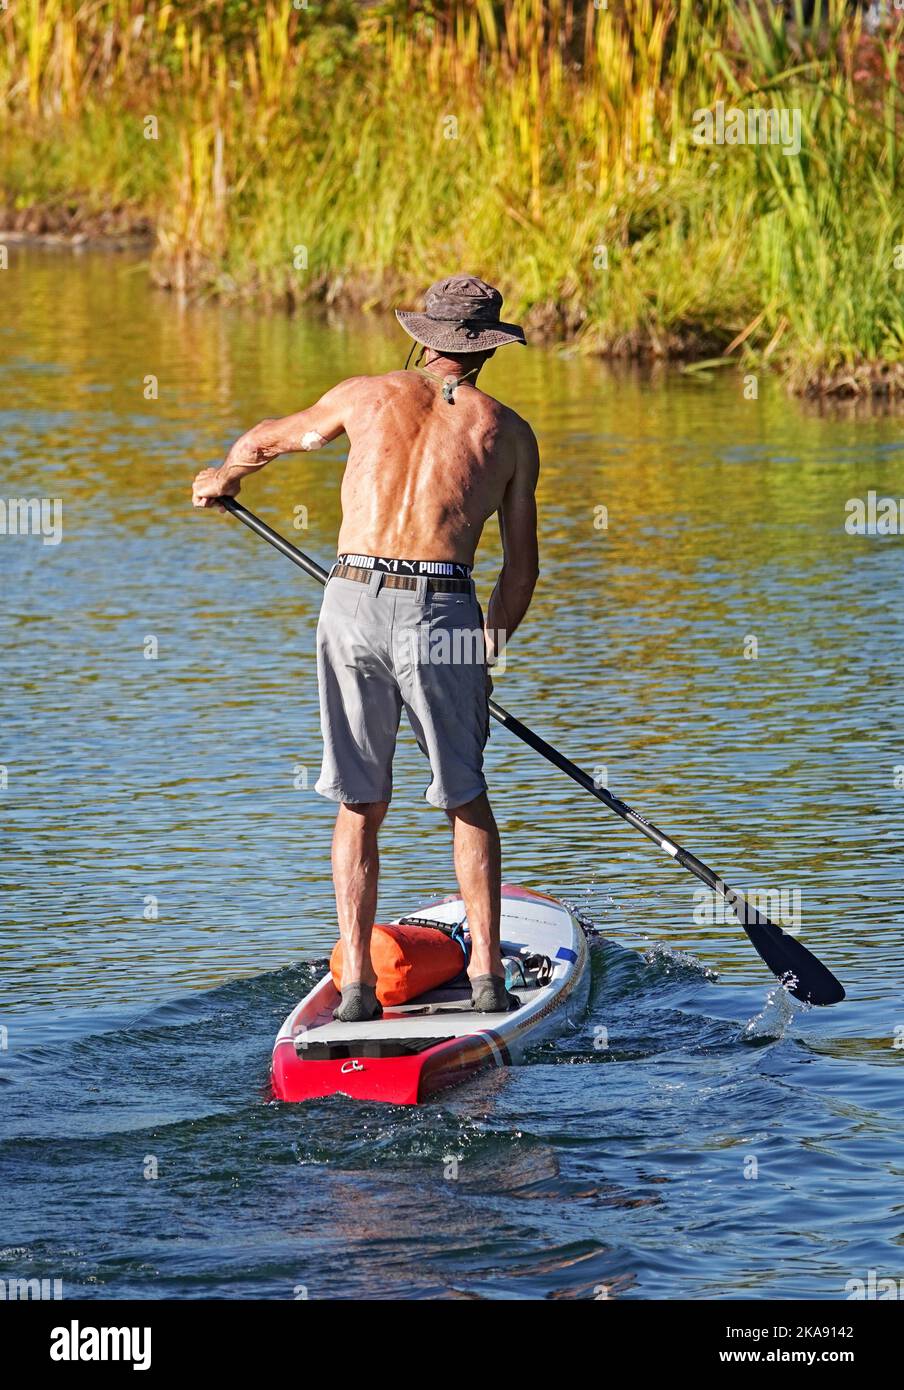 A man in shorts navigating the Deschutes River near Bend, Oregon, on a paddleboard. Stock Photo